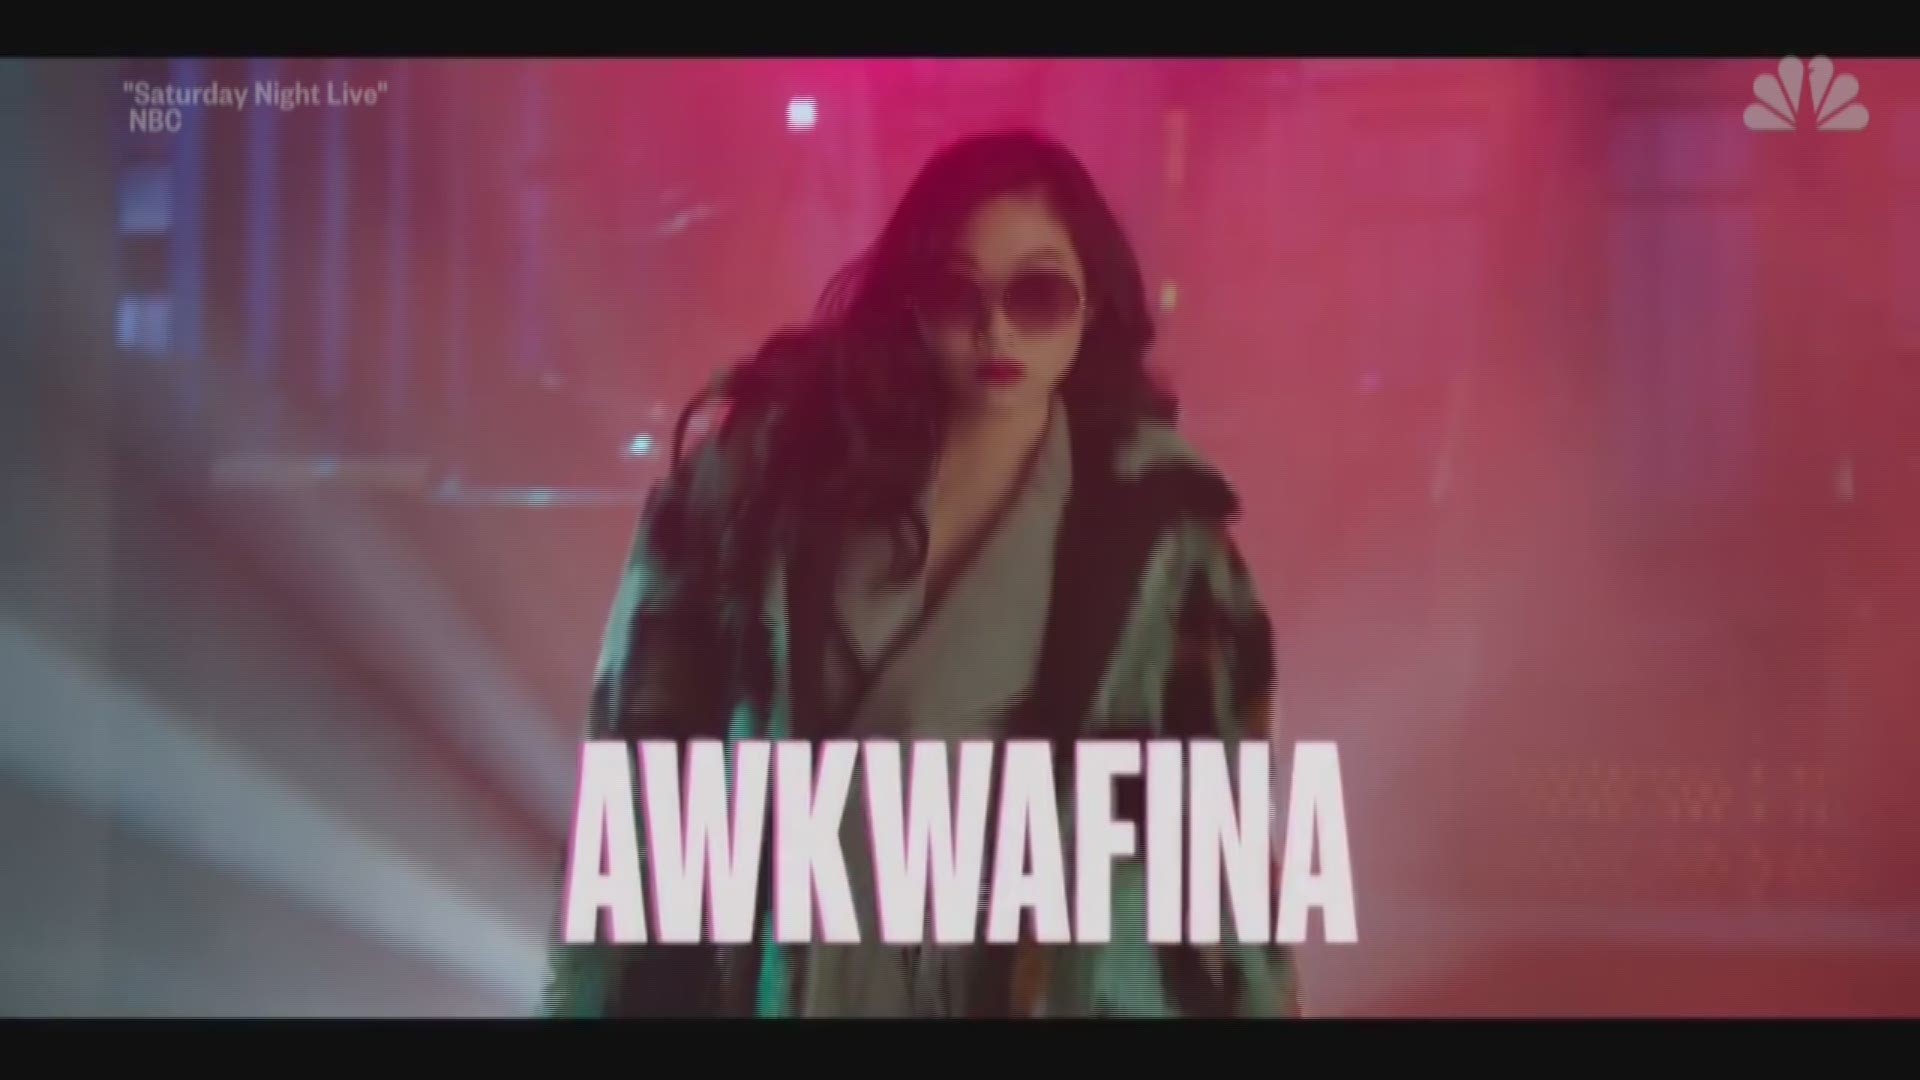 Rapper, comedian and actress Awkwafina, fresh off the success of "Crazy Rich Asians," hosts this week's "Saturday Night Live."